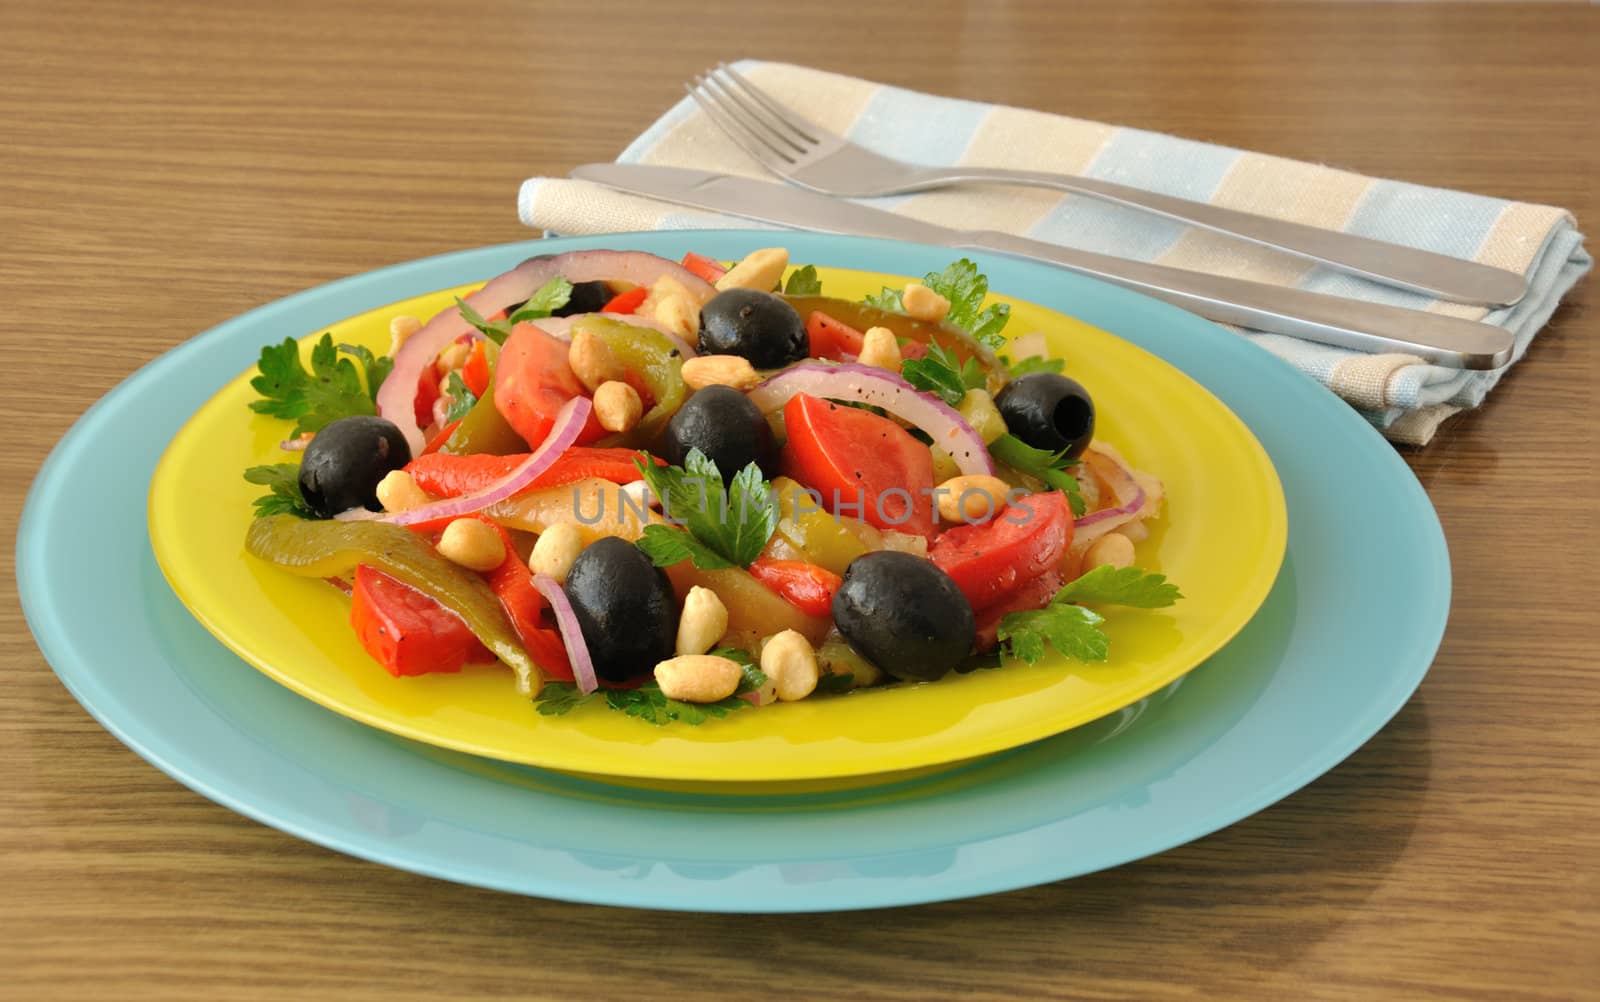 Salad of roasted peppers with tomato, peanuts and olives, onions and greens 